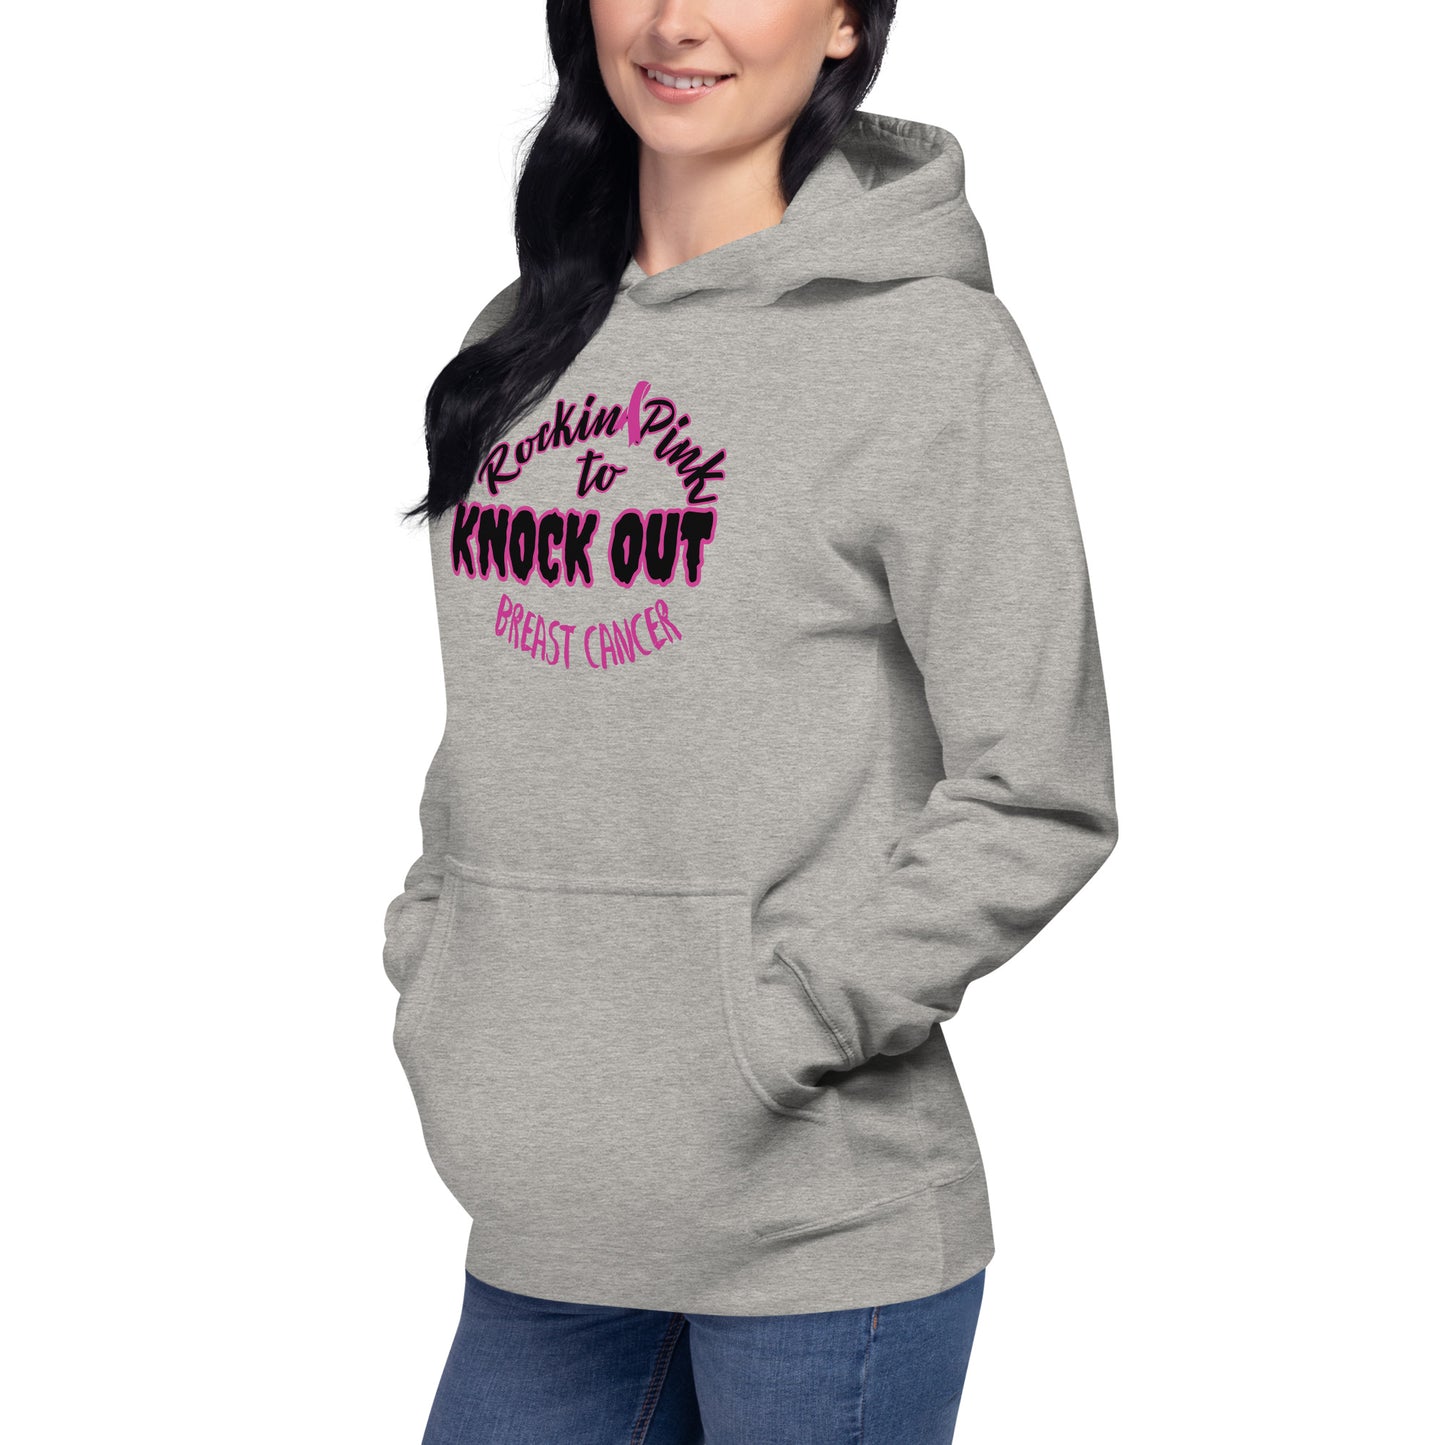 Knock Out Breast Cancer Hoodie